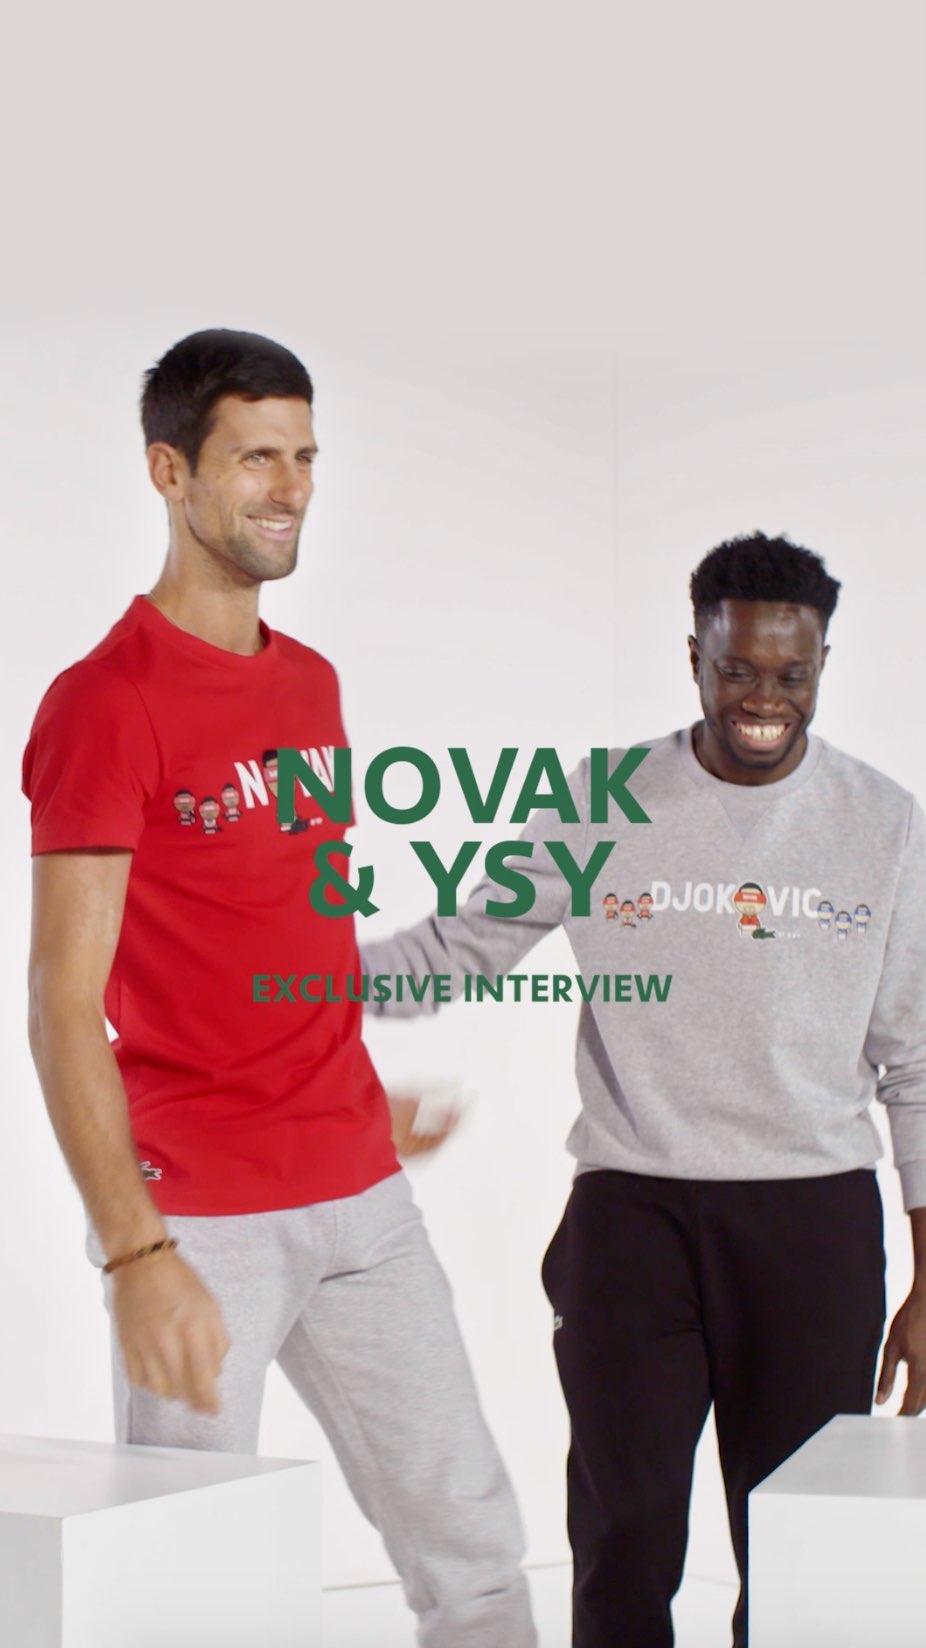 Lacoste - First encounter, sharing their passion and inspiration. @djokernole and the artist @takeitysy, who is also fan of Novak, introduce the origin of their collaboration #NovakDjokovicXYSY #tenni...